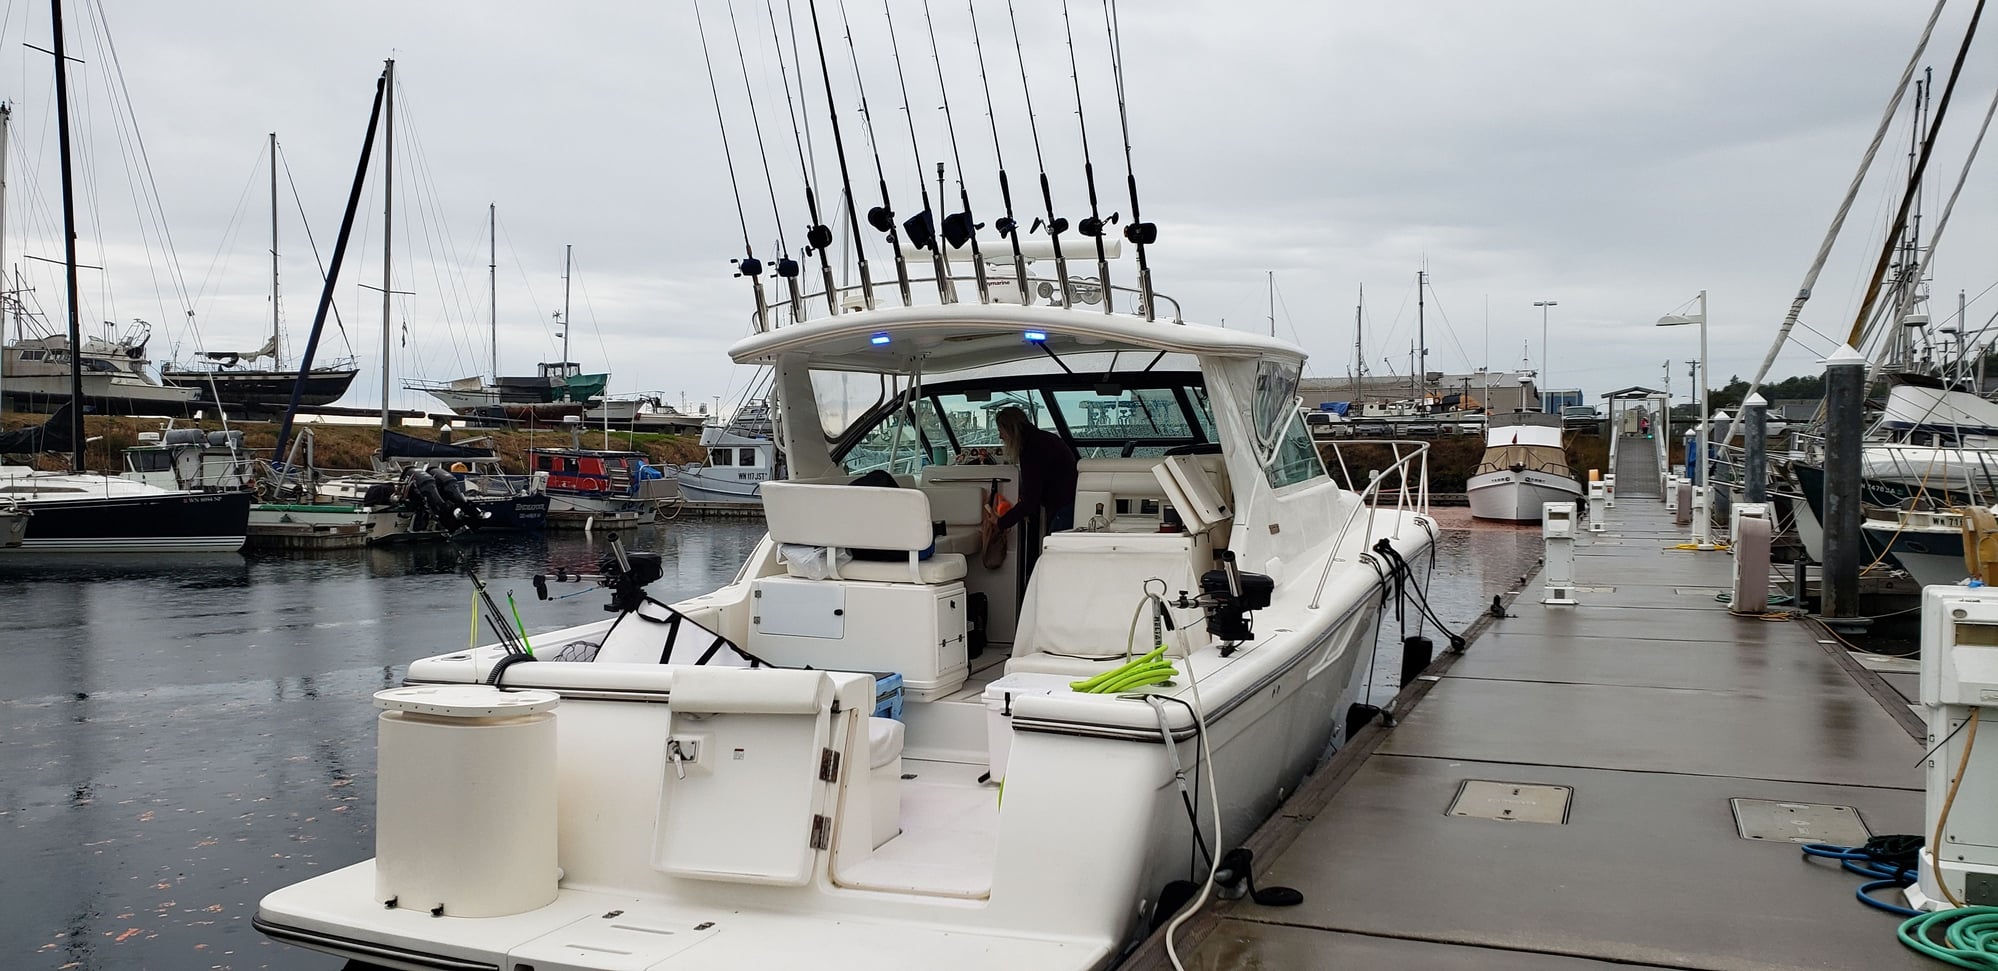 Rod holder recommendations - Page 2 - The Hull Truth - Boating and